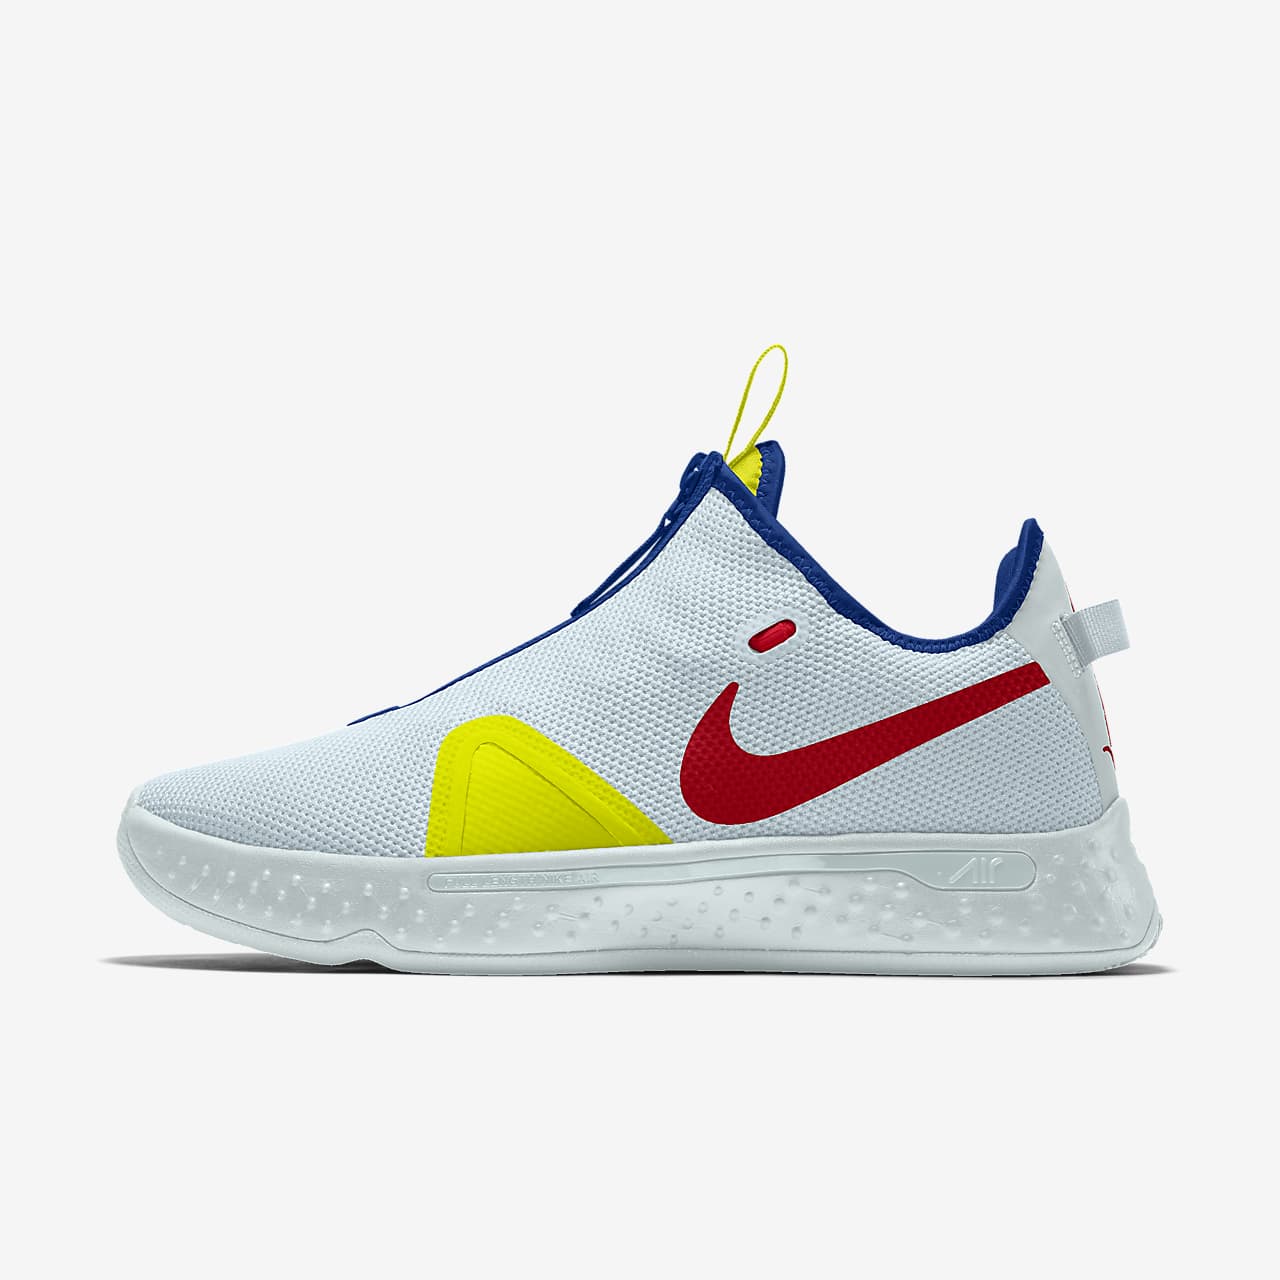 nike by you pg 4